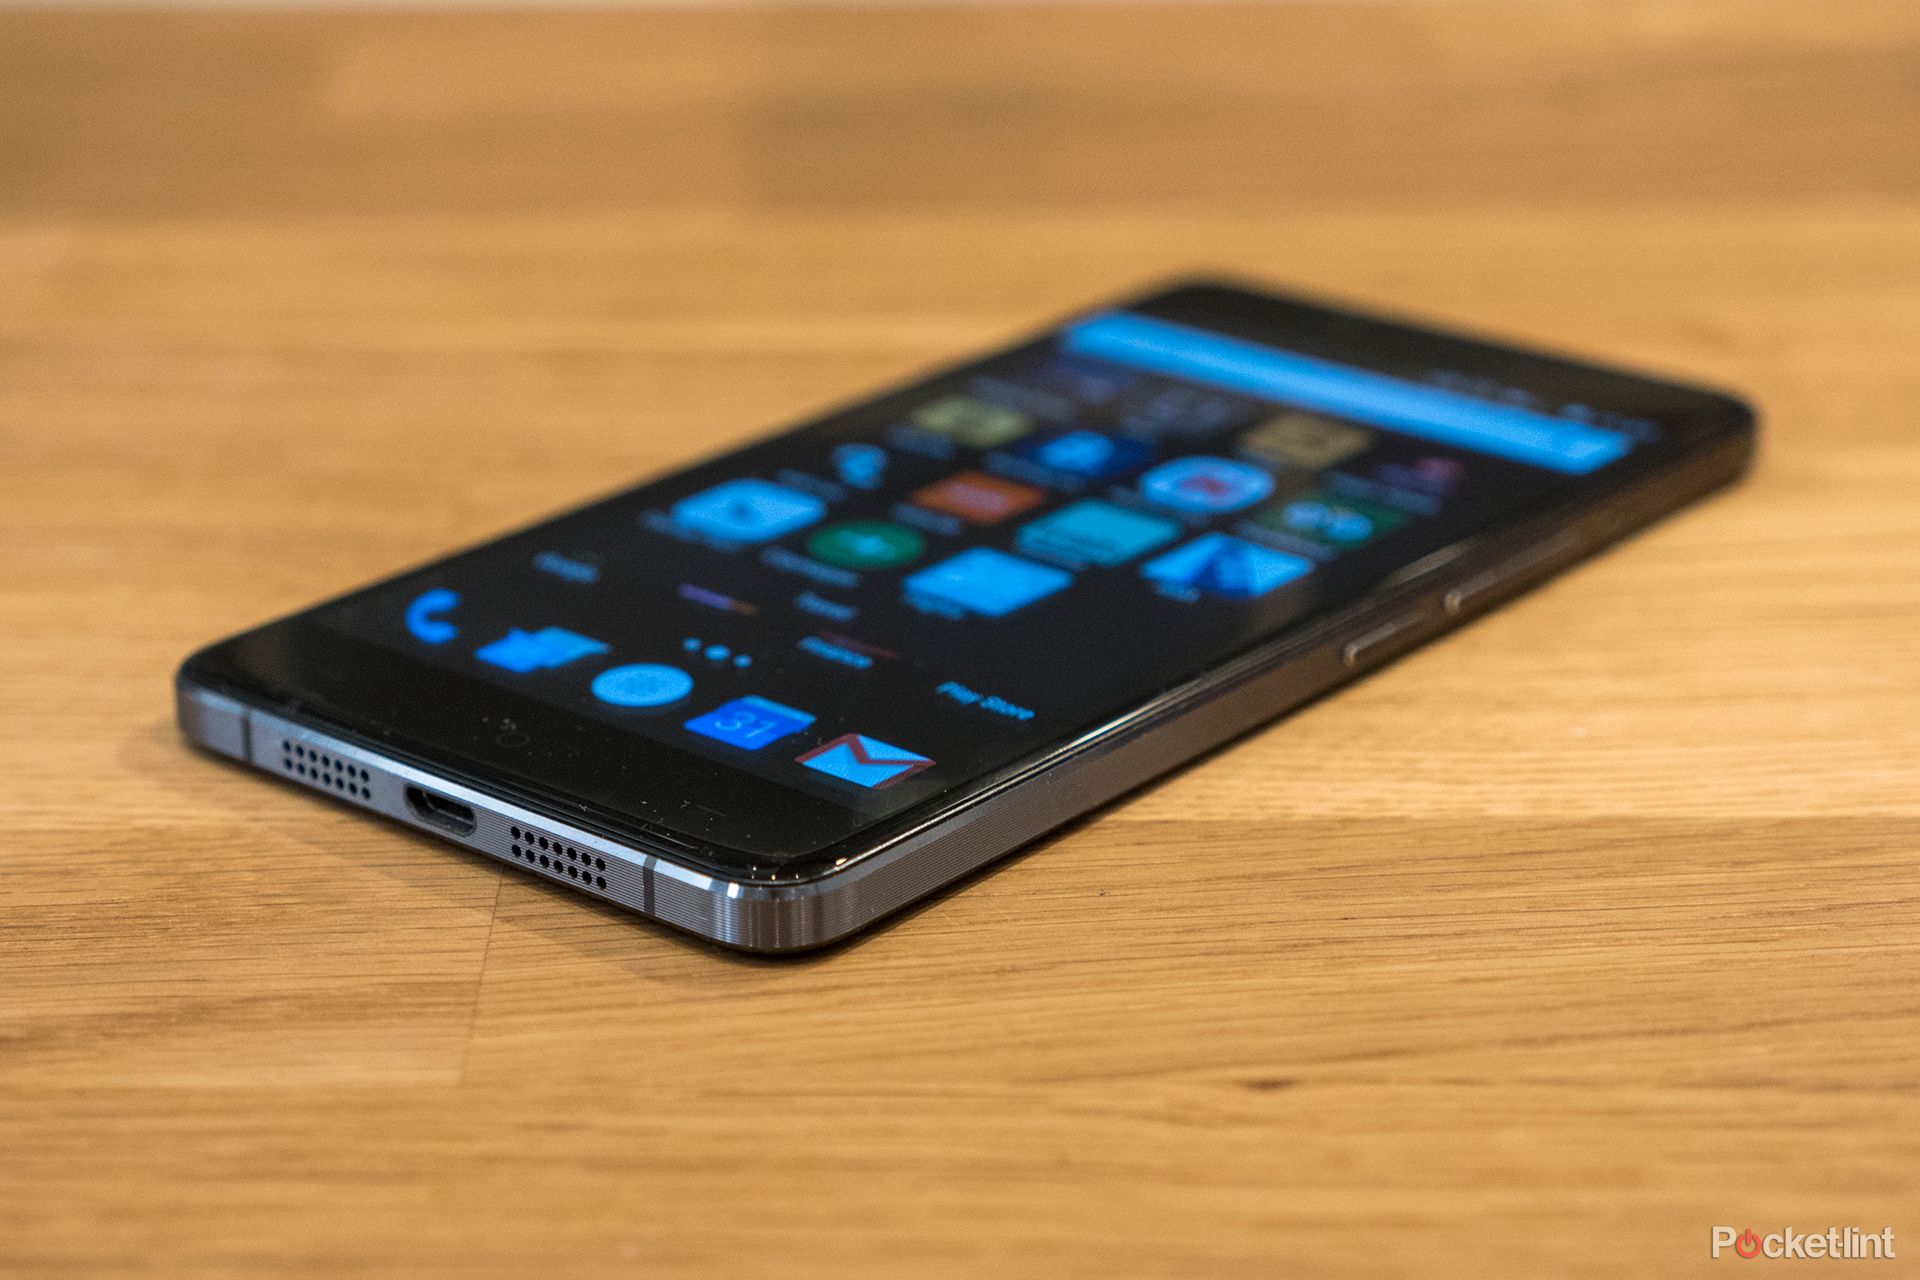 oneplus x review image 2